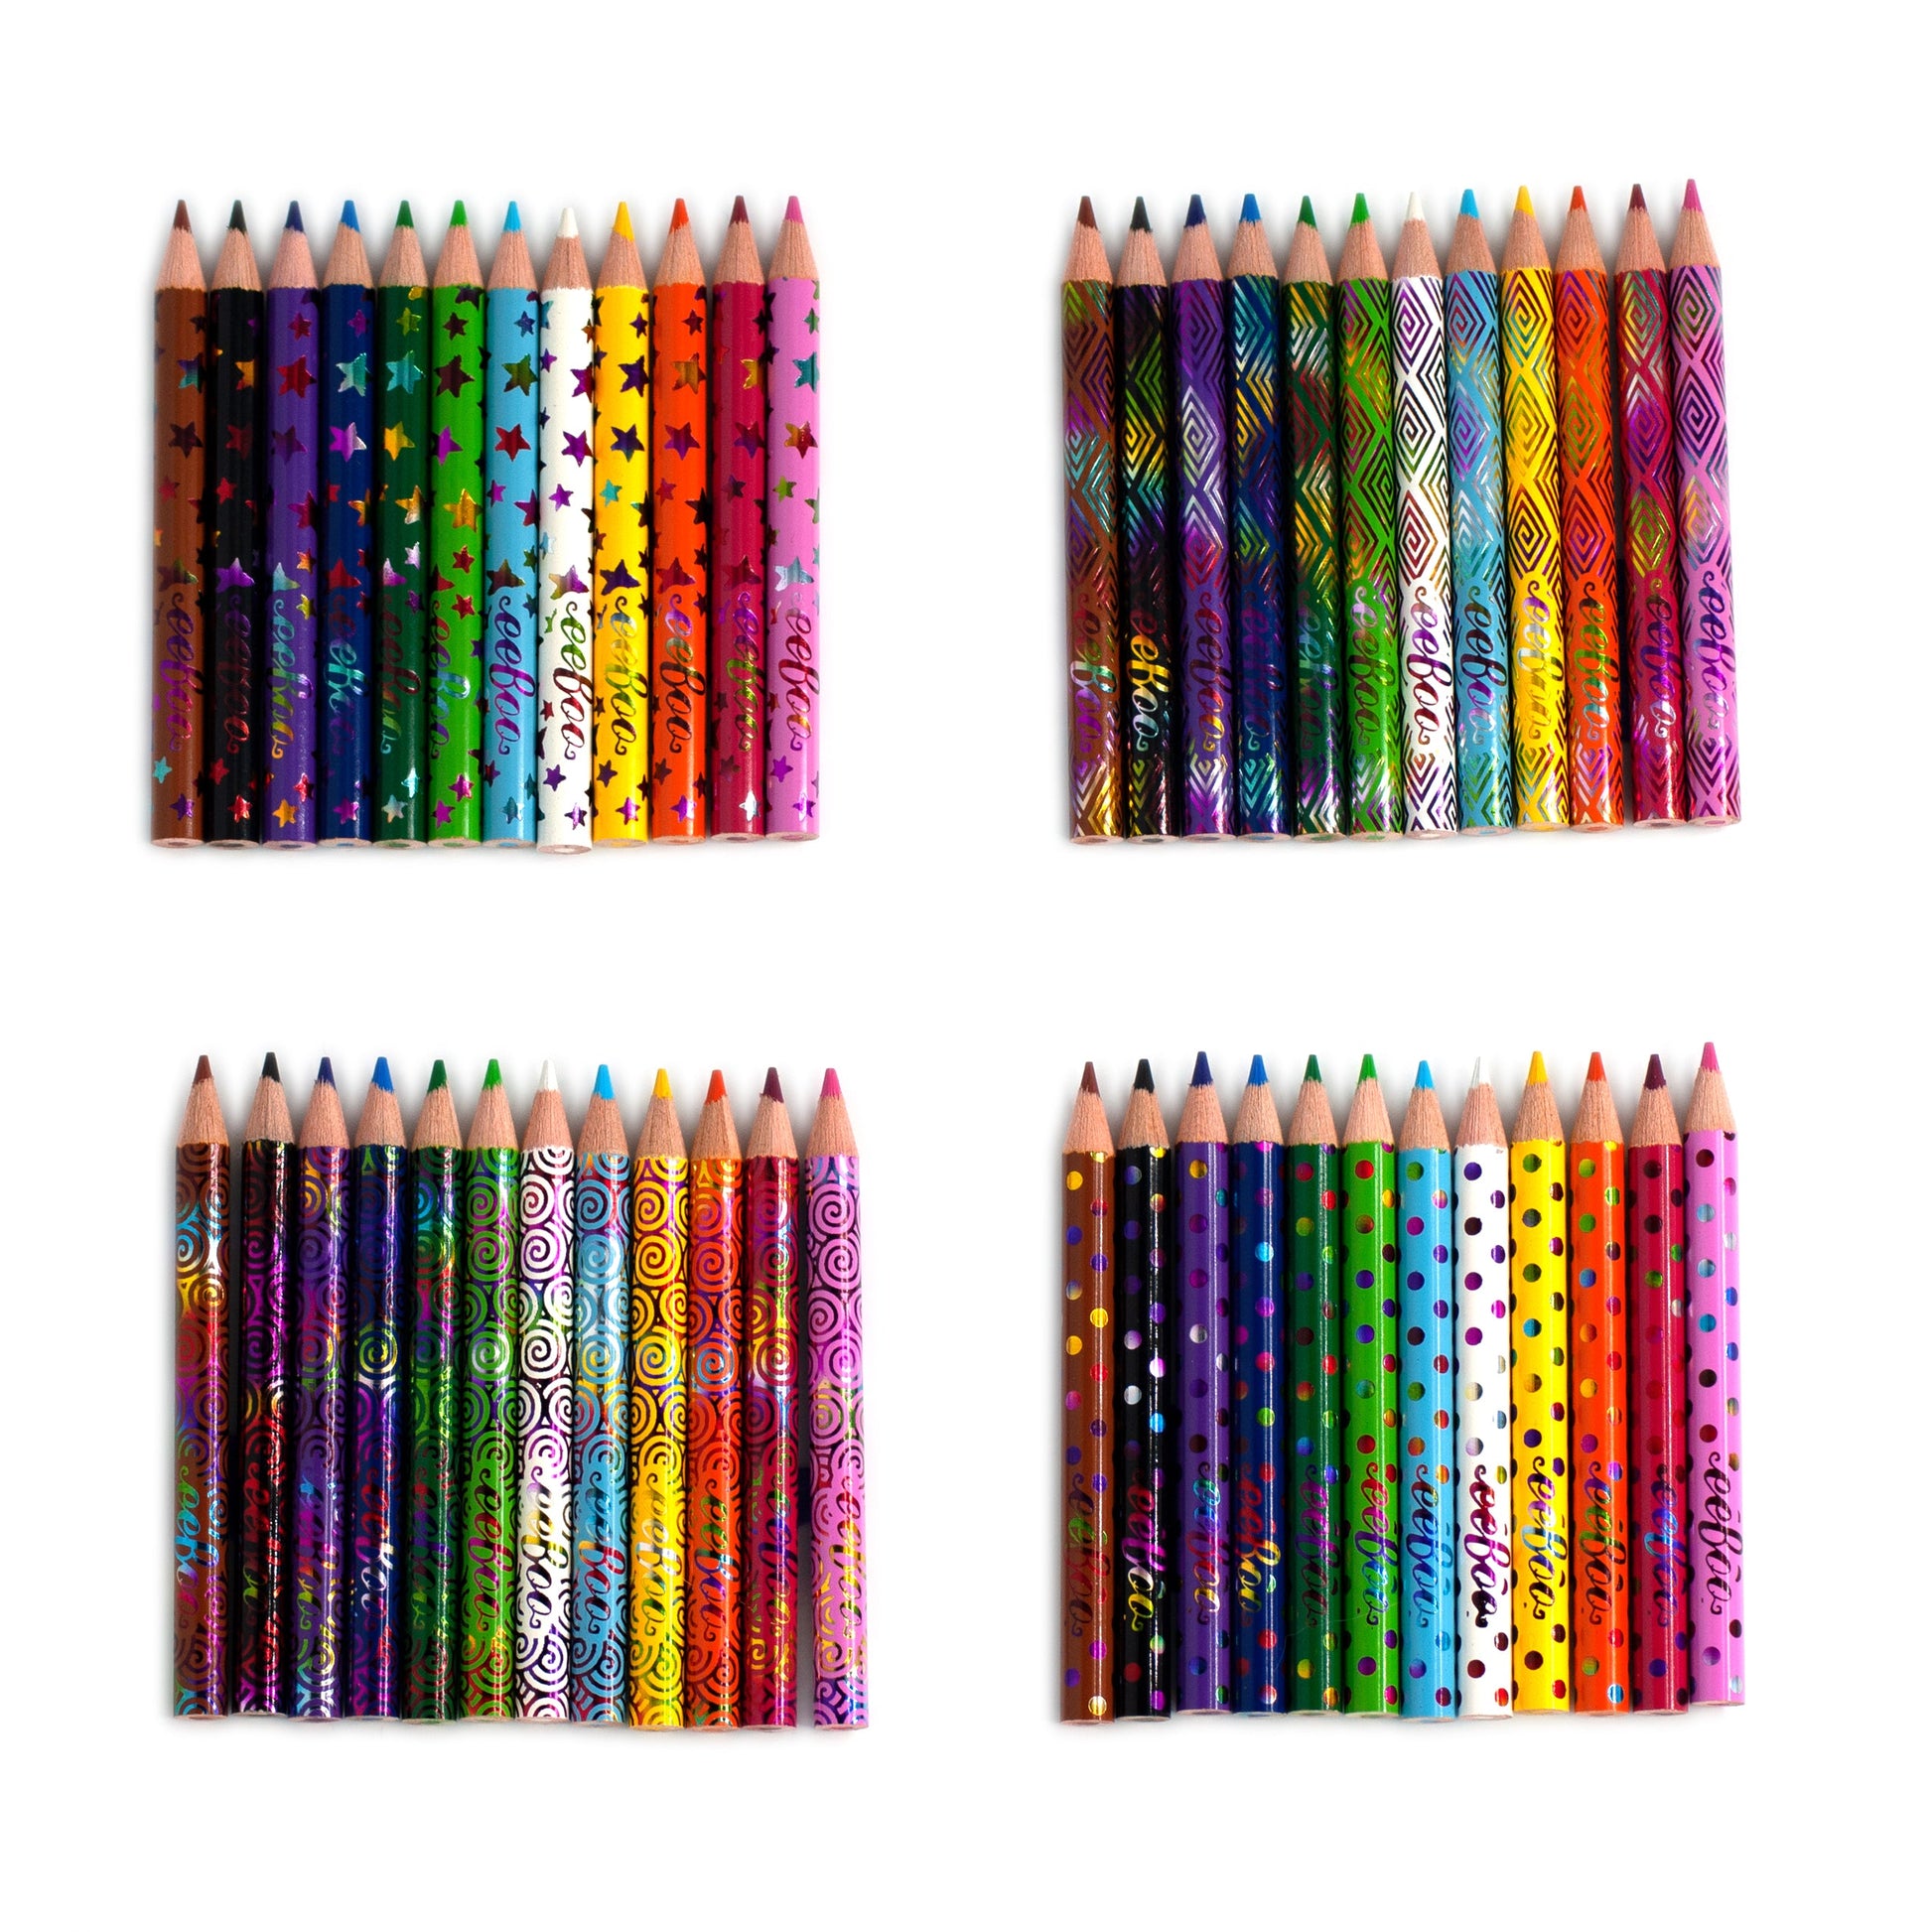 Small Color Pencils Winter Assortment (24) | Unique Gifts for Party Favors